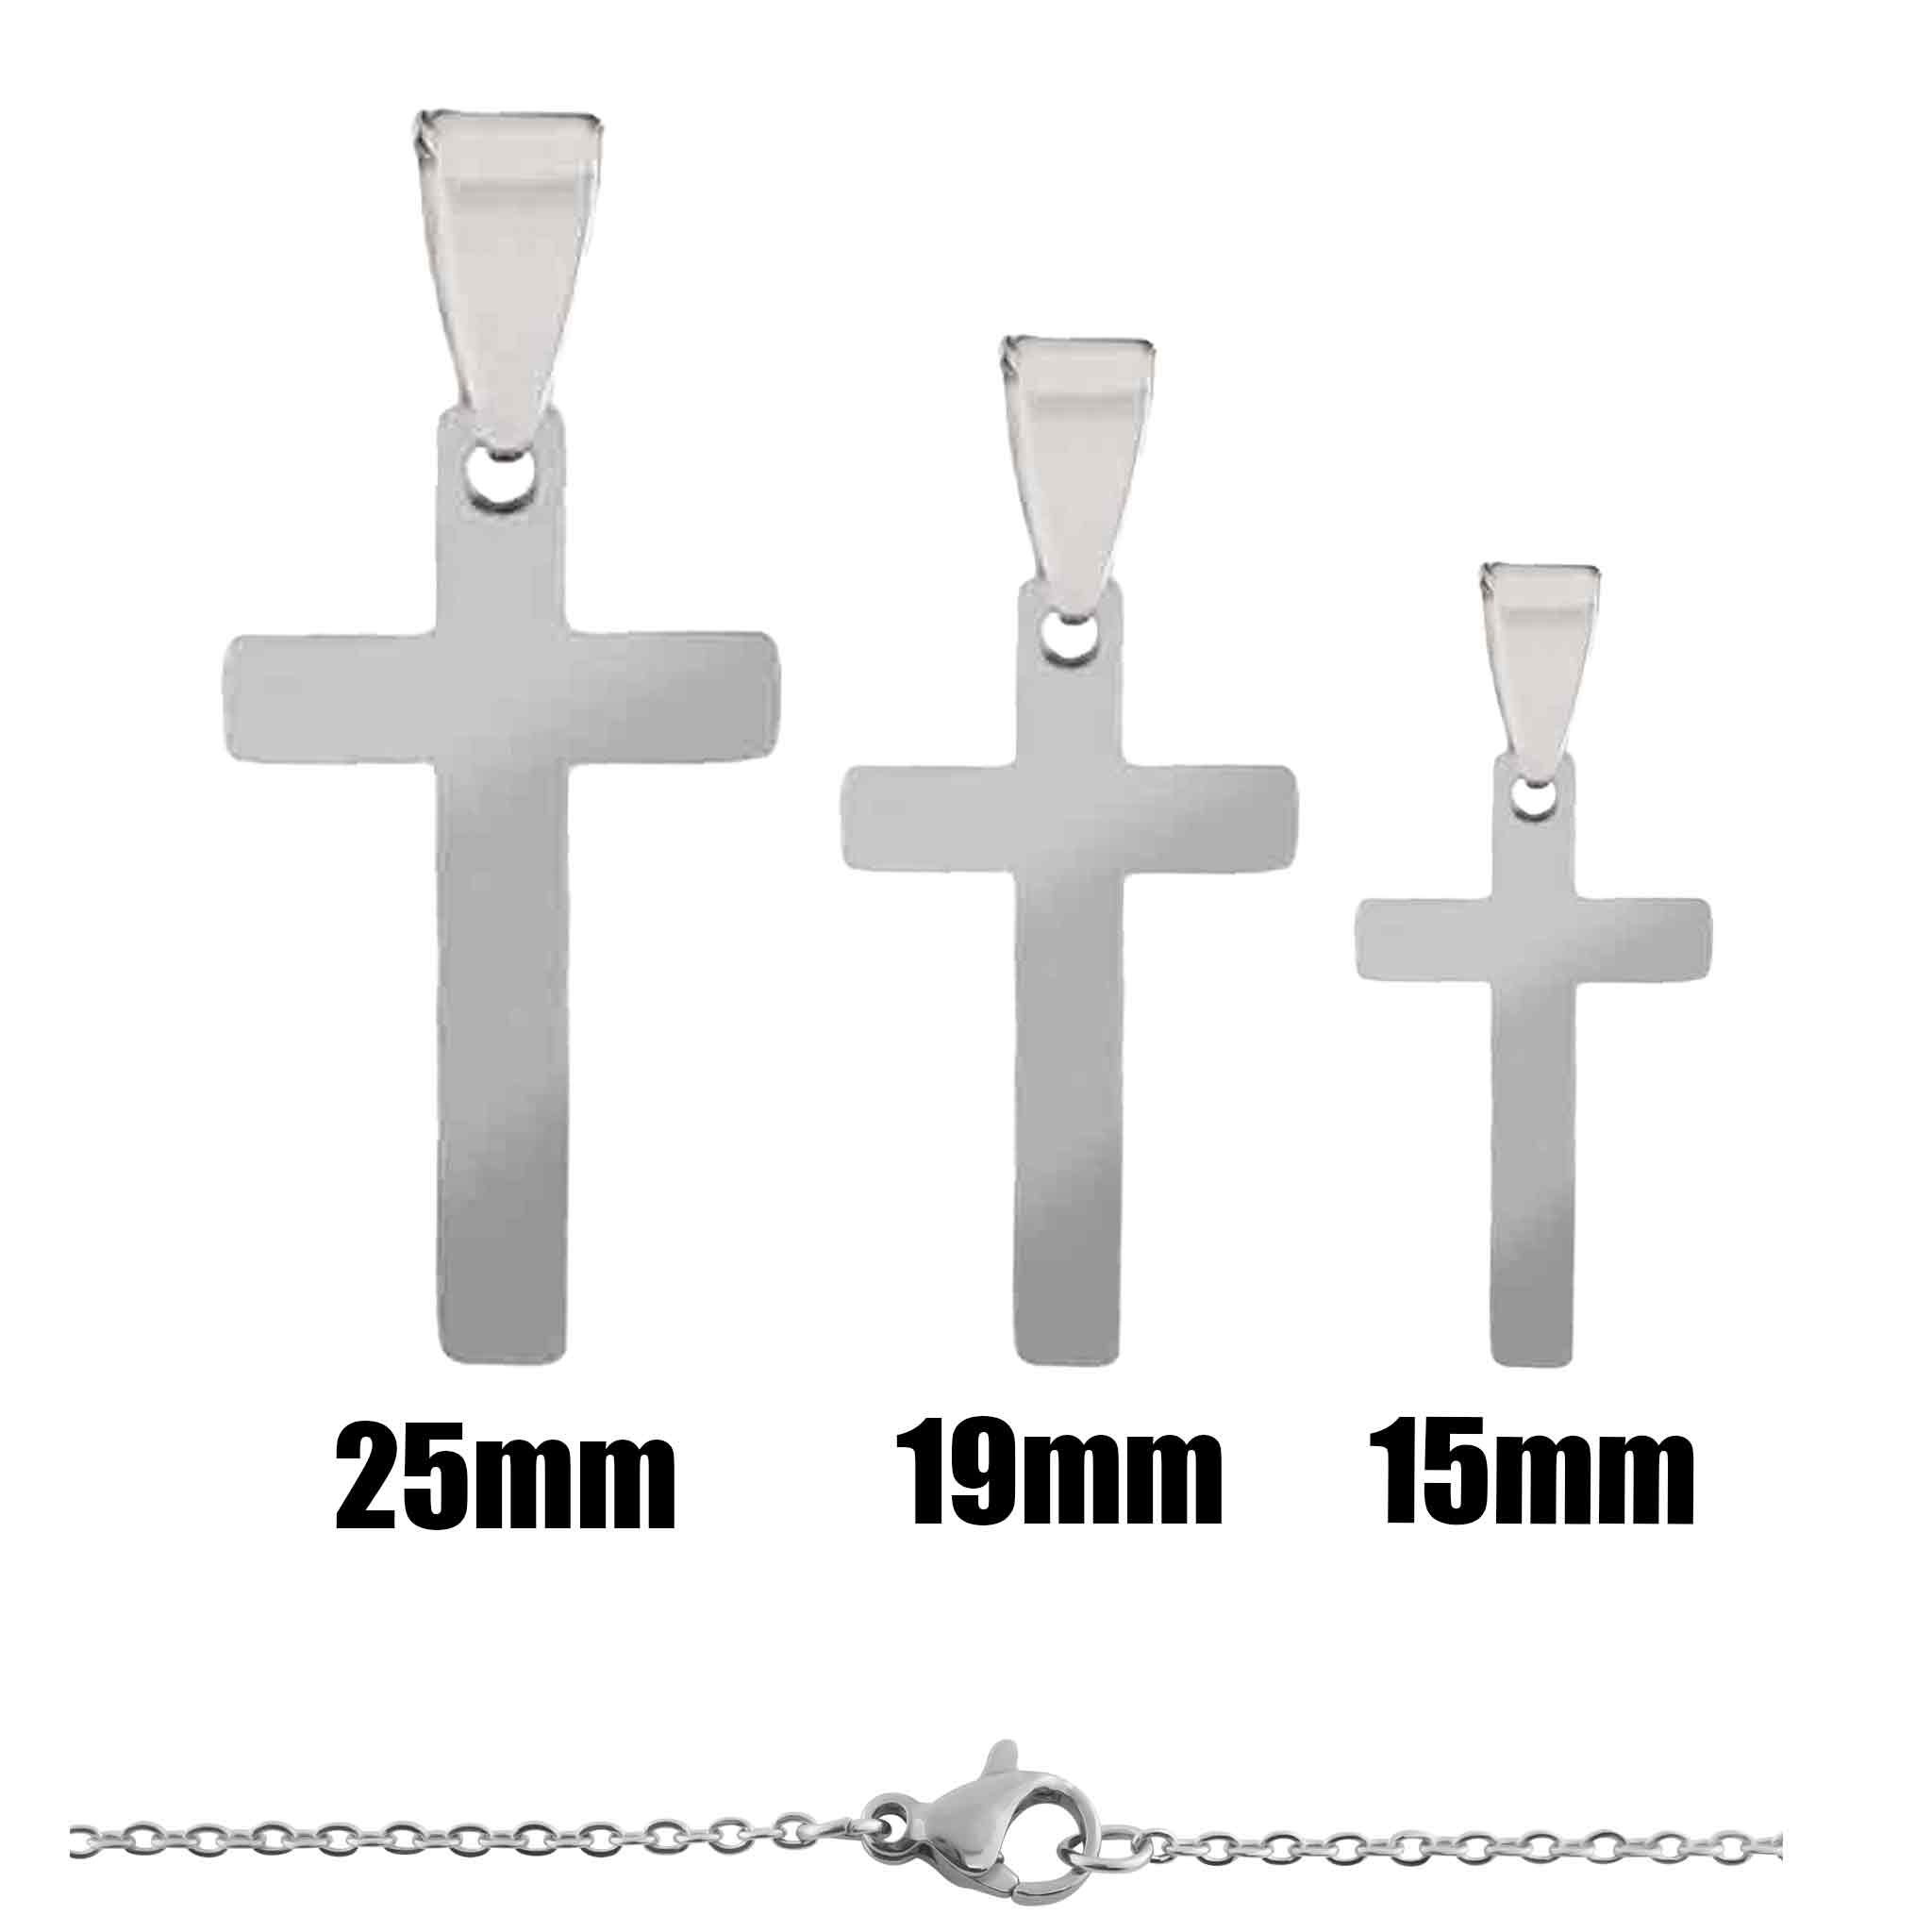 New Gift Unisex's Men's Silver Stainless Steel Big Cross Pendant Chain  Necklace | eBay